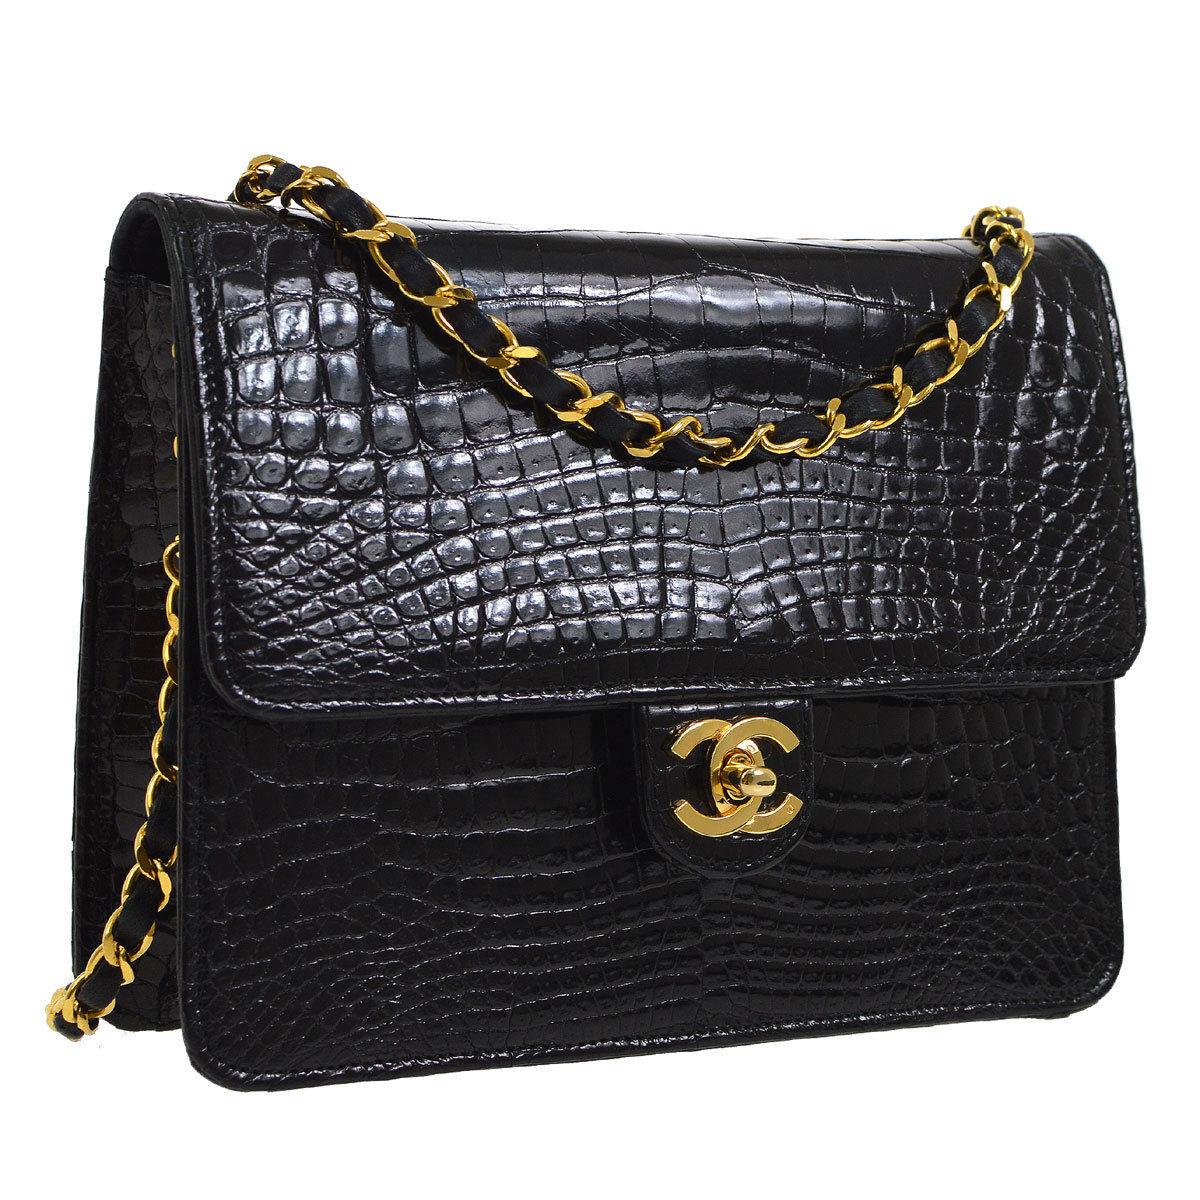 Chanel Rare Black Crocodile Small Party Evening Shoulder Flap Bag

Crocodile
Gold tone hardware
Leather lining
Made in France
Shoulder strap drop 17.5